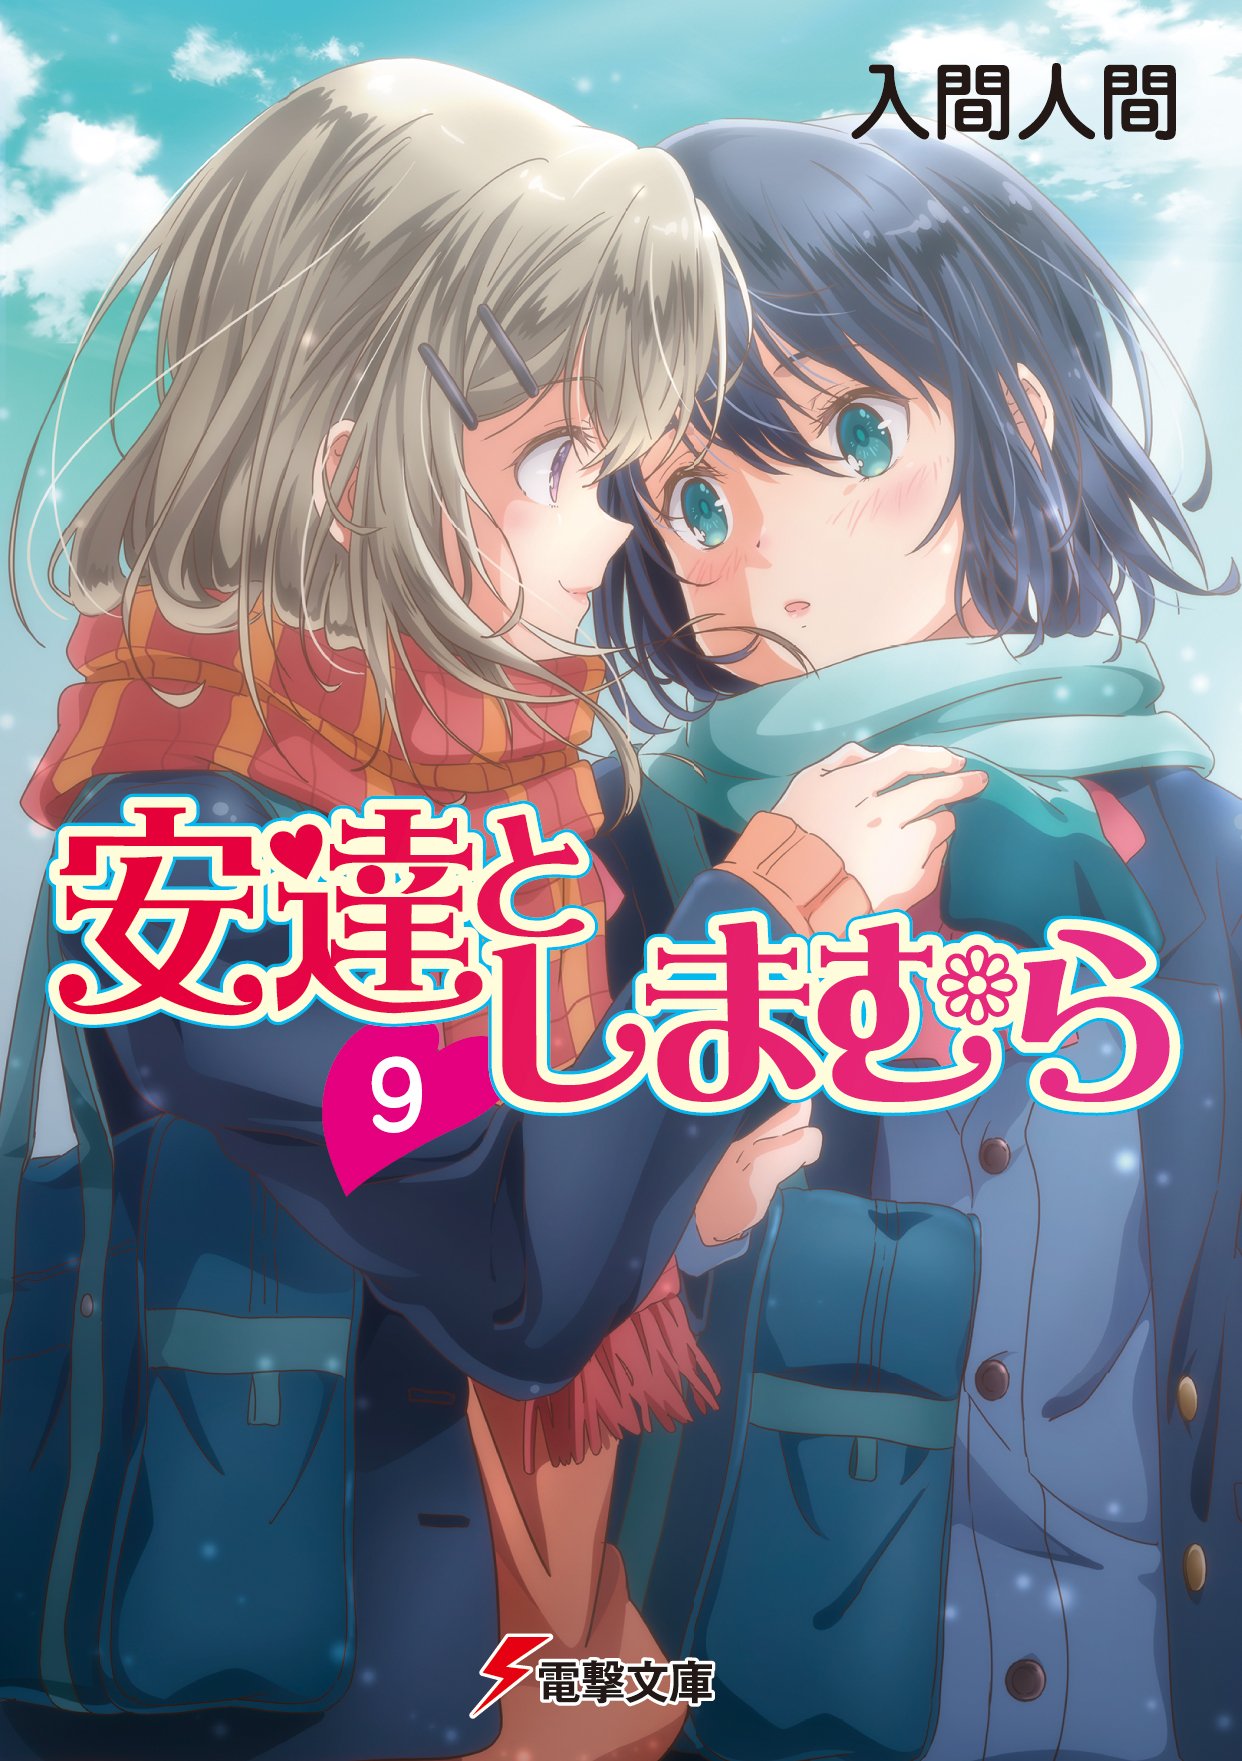 Adachi and Shimamura Light Novel To End With Next Volume